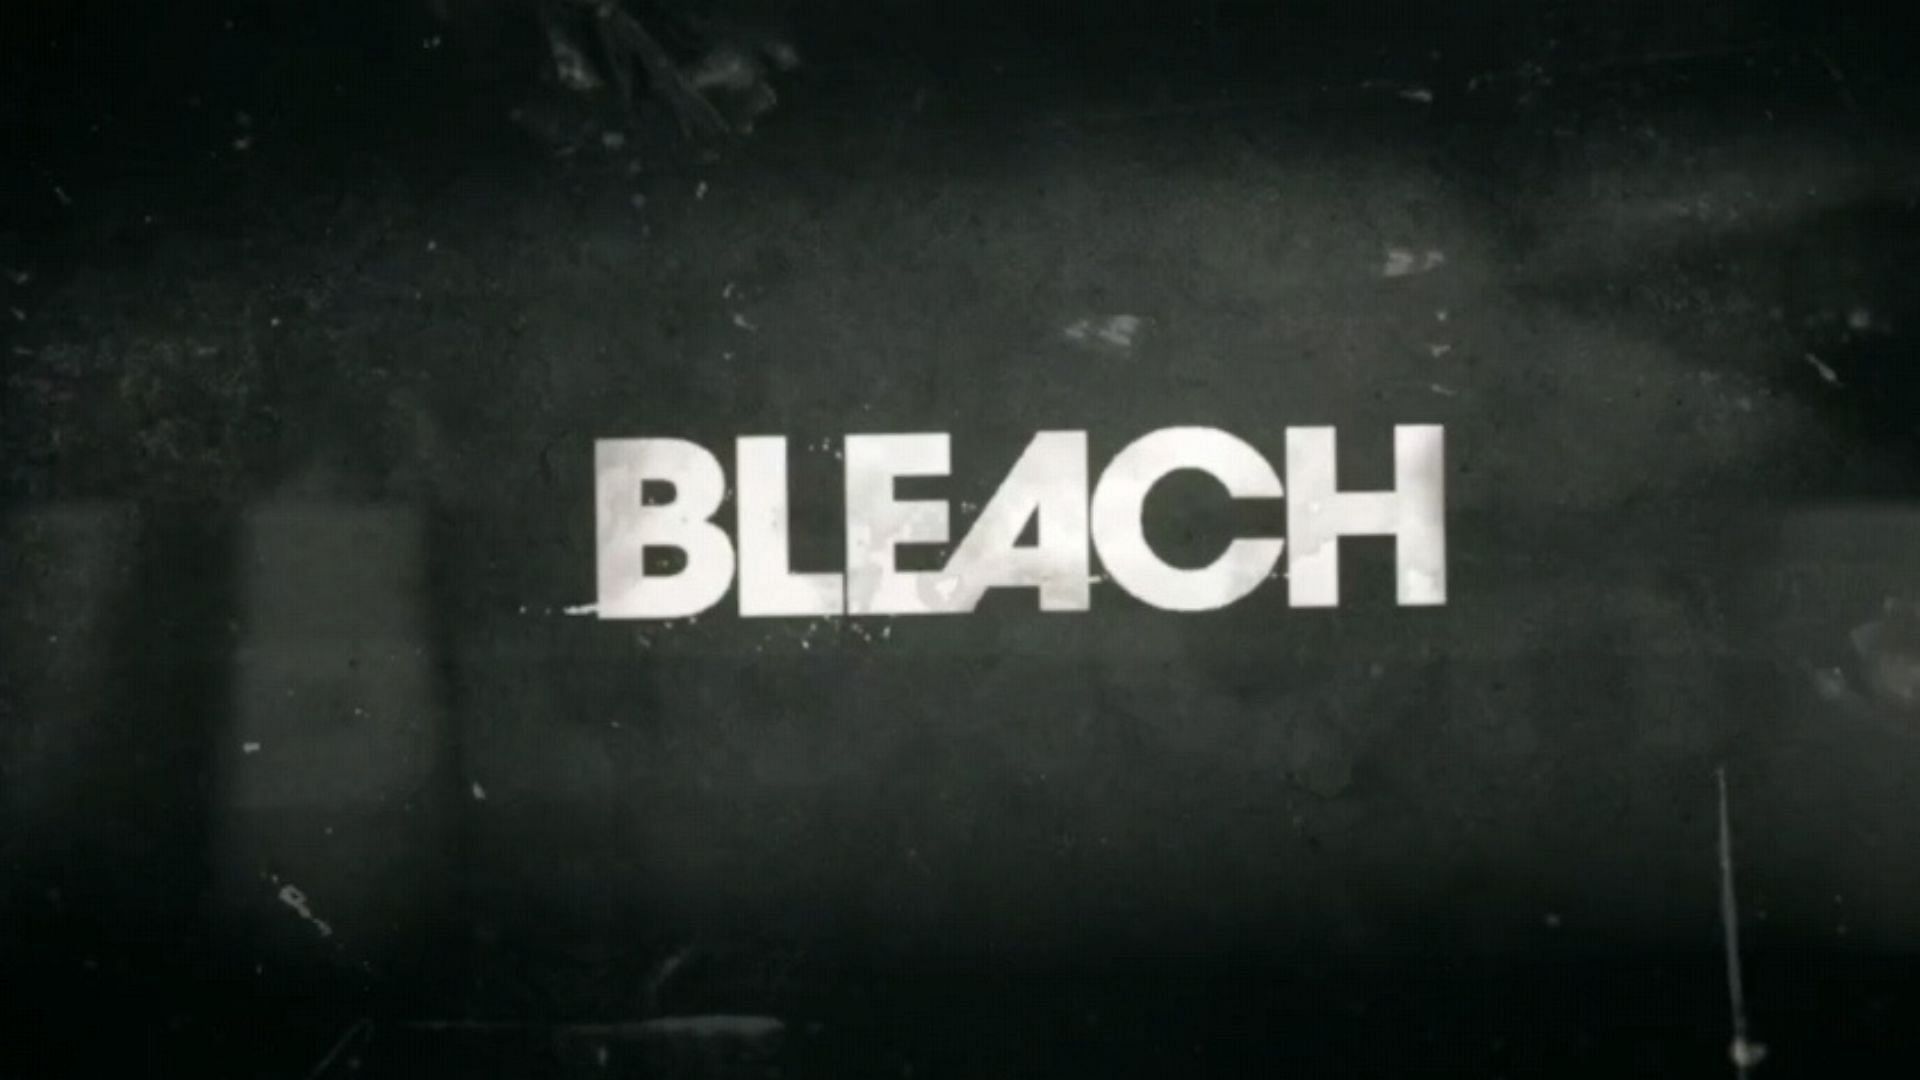 Every new character introduced in Bleach: Thousand-Year Blood War episode 1